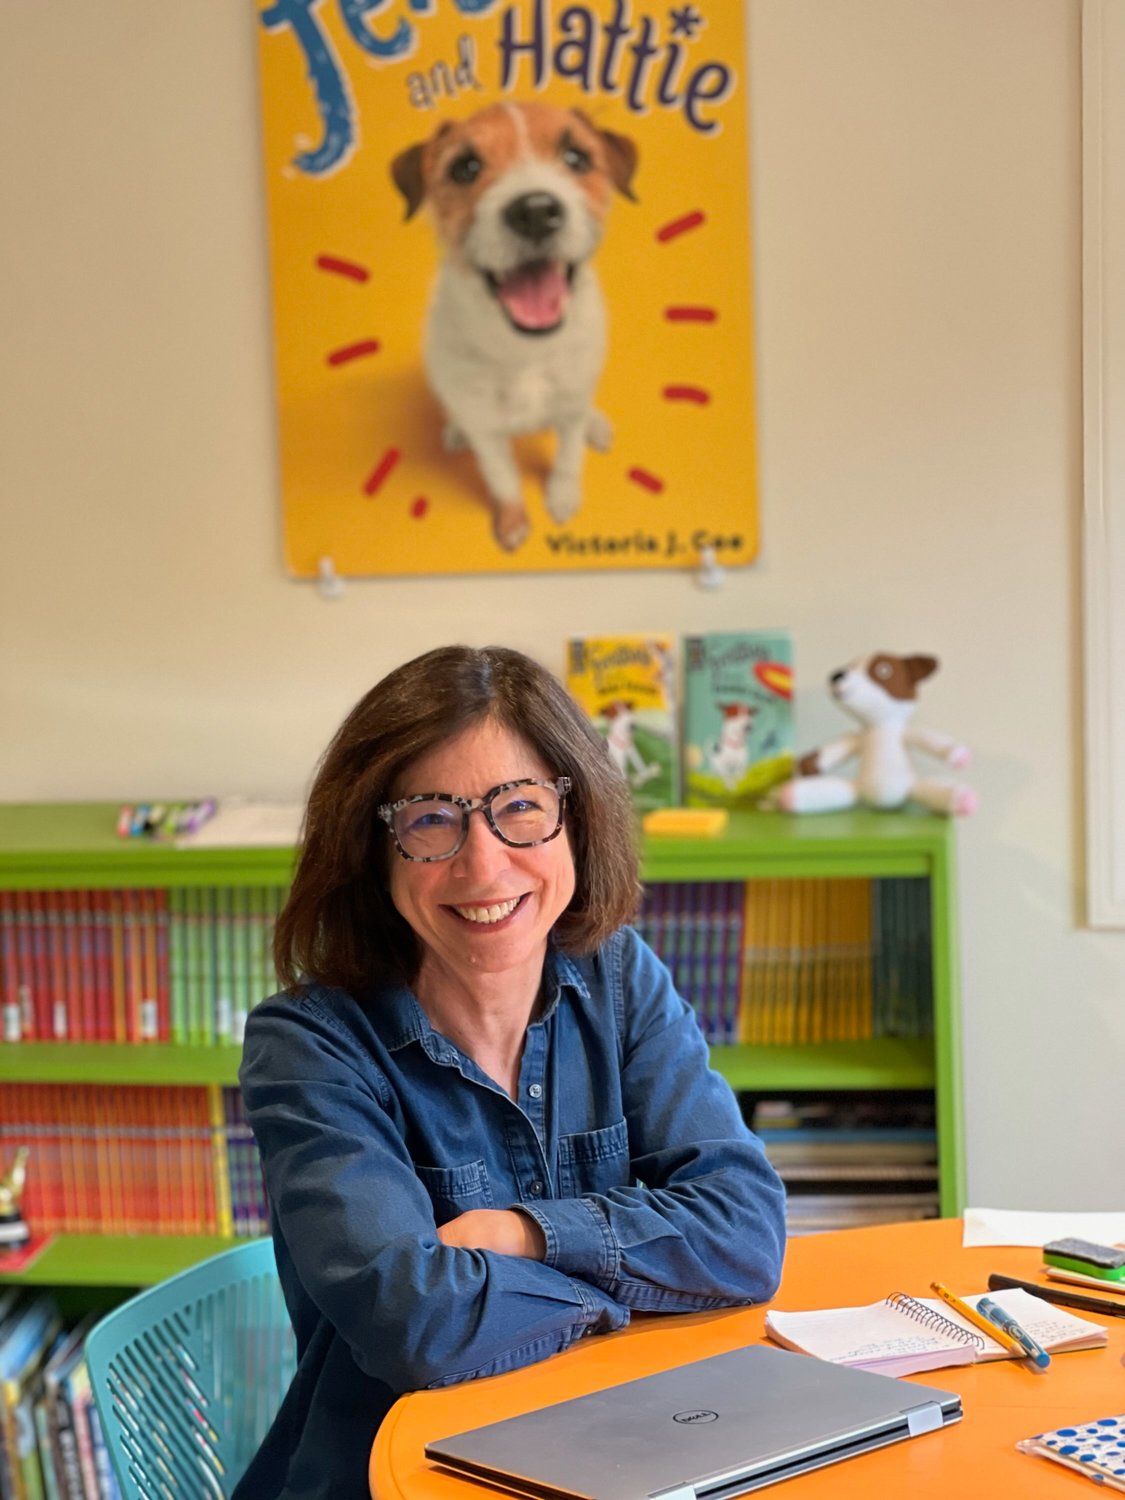 children’s author Victoria J. Coe, known for the “Fenway and Hattie” series, made a surprise visit to school #3 on May 18. Teacher Wendy Rossberg says the visit helped connect classroom lessons to the real world.